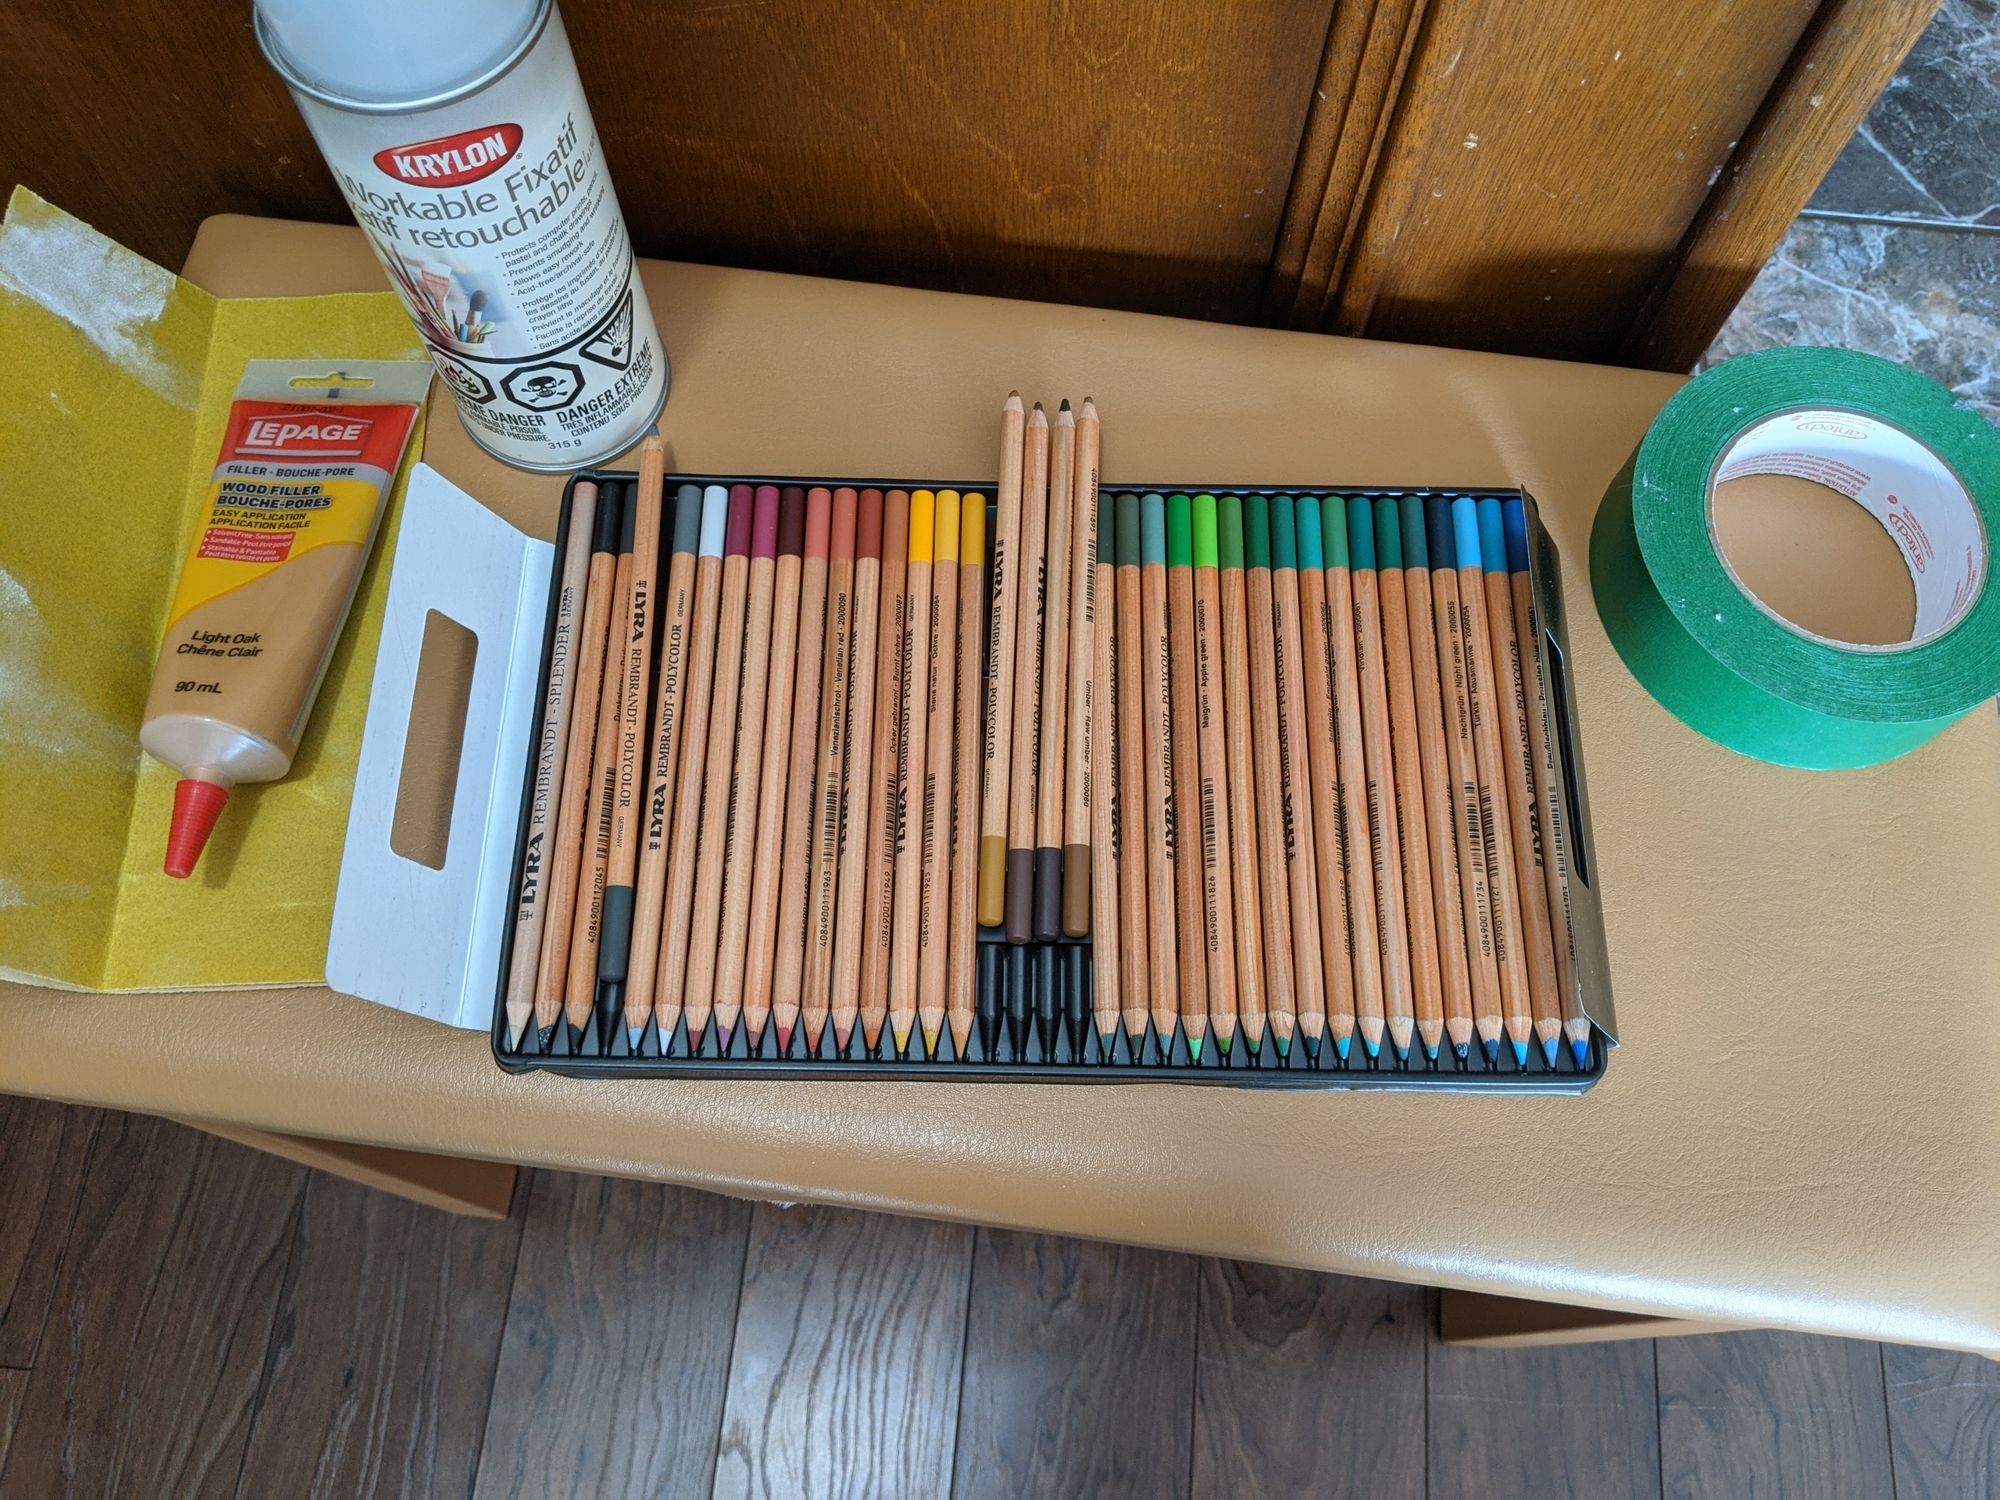 Sandpaper, wood filler, workable fixative, pencil crayons, and masking tape displayed on a piano bench.